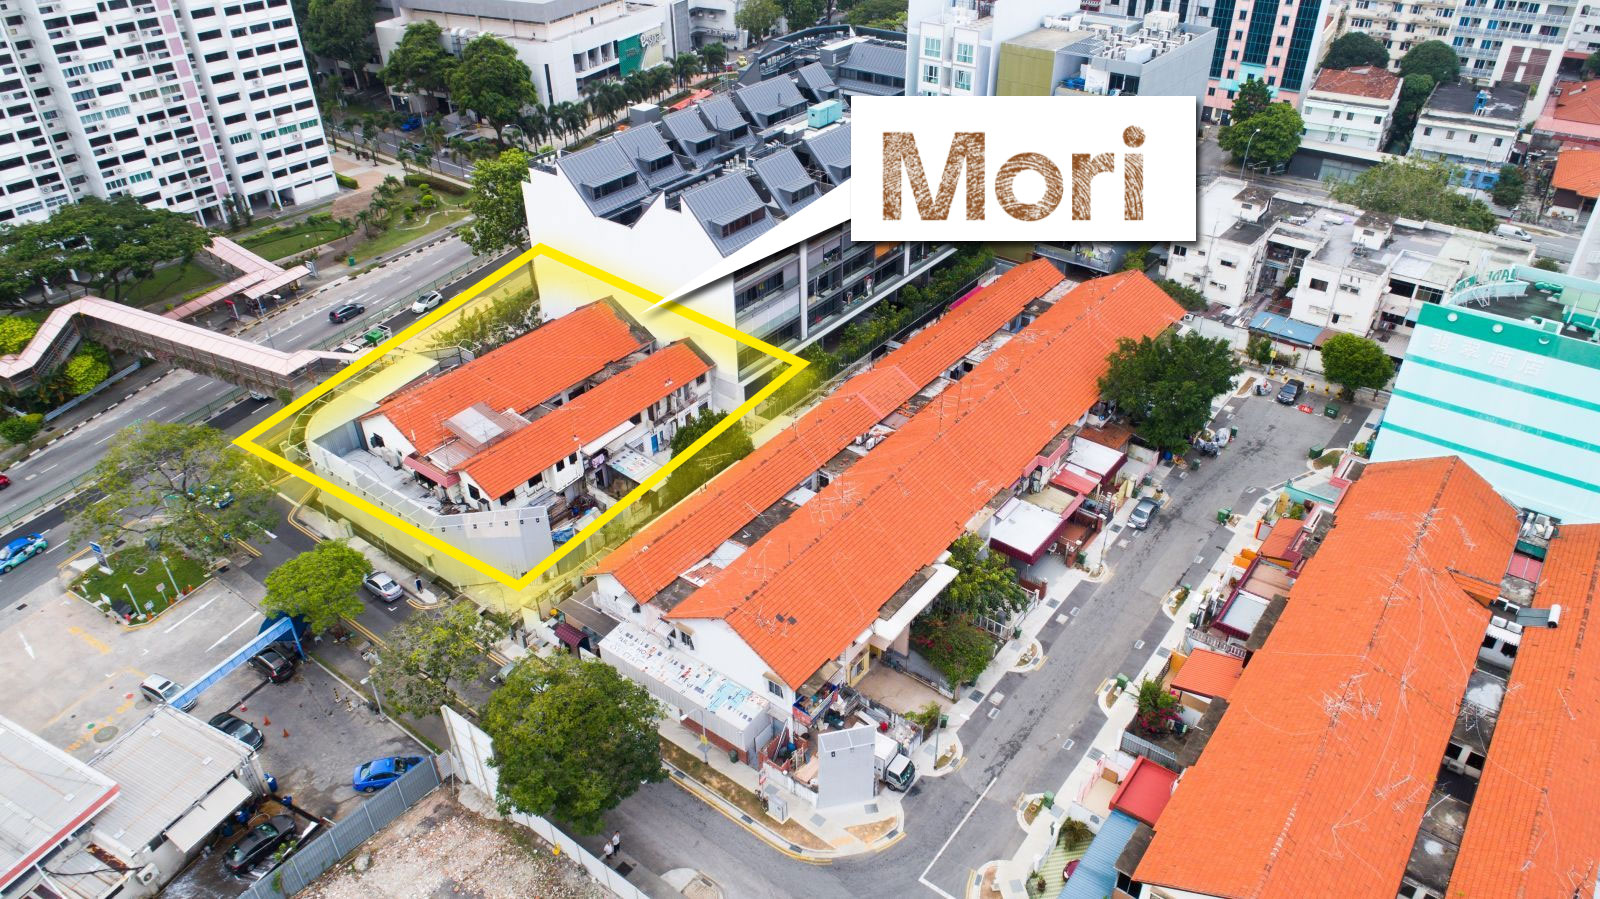 Mori Condo ready to offer Exclusive Property to Home Owners at Strategic Location of Guillemard Road